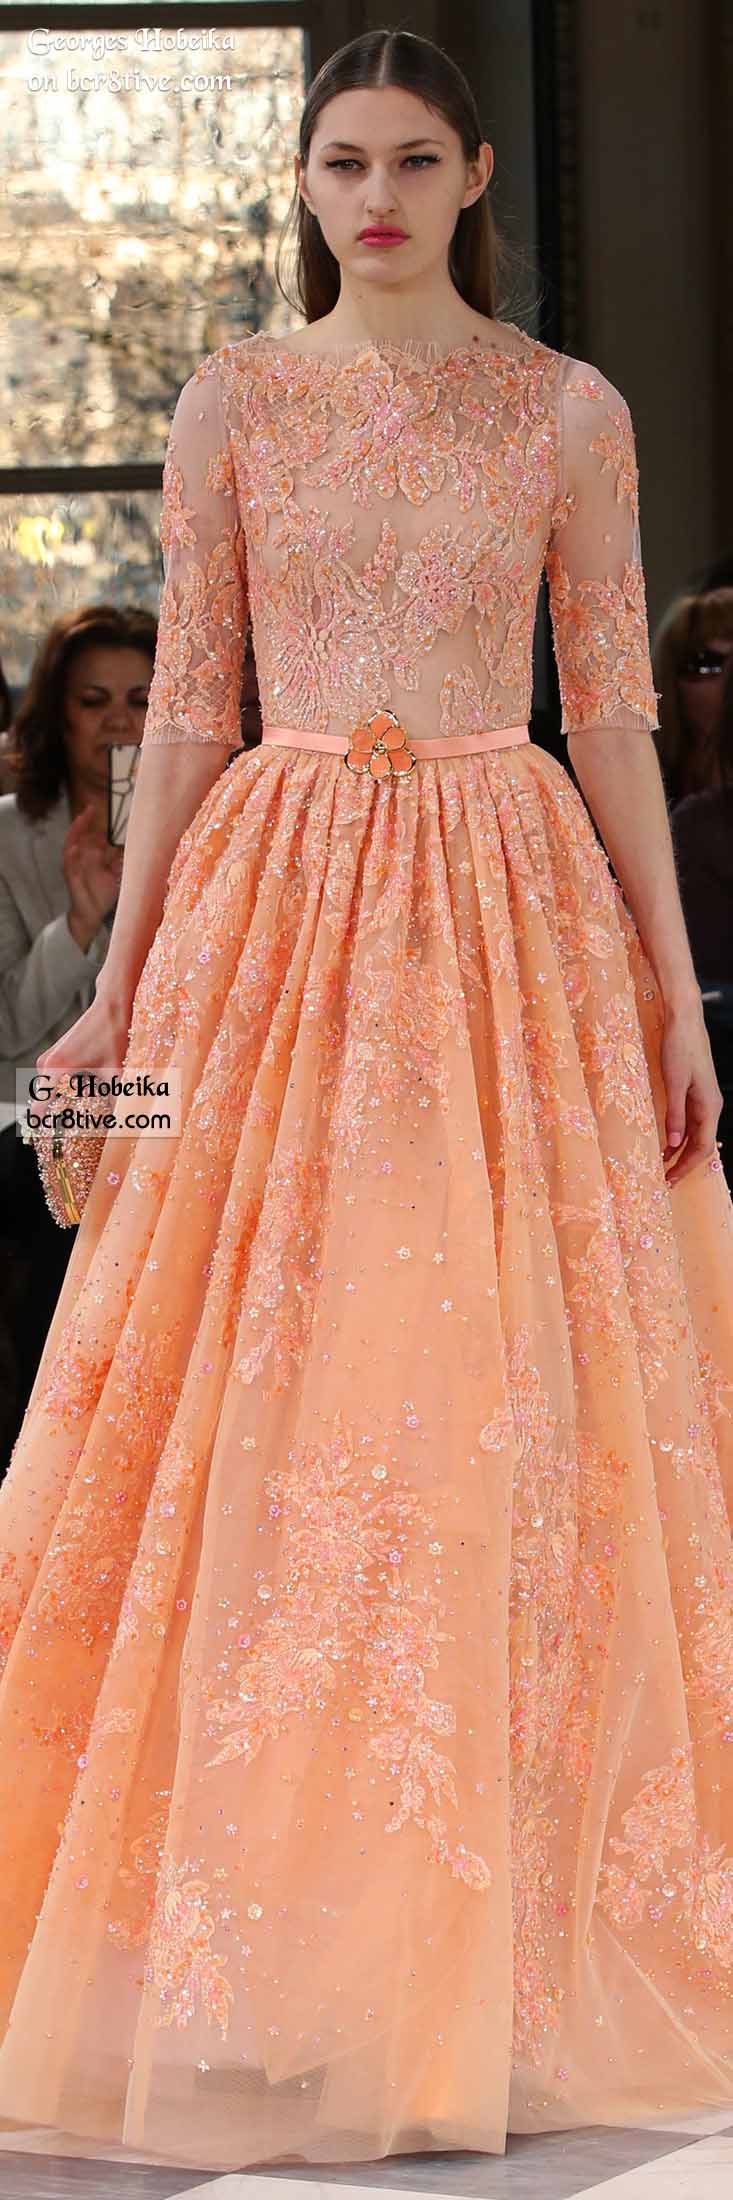 Georges Hobeika Spring 2016 Haute Couture